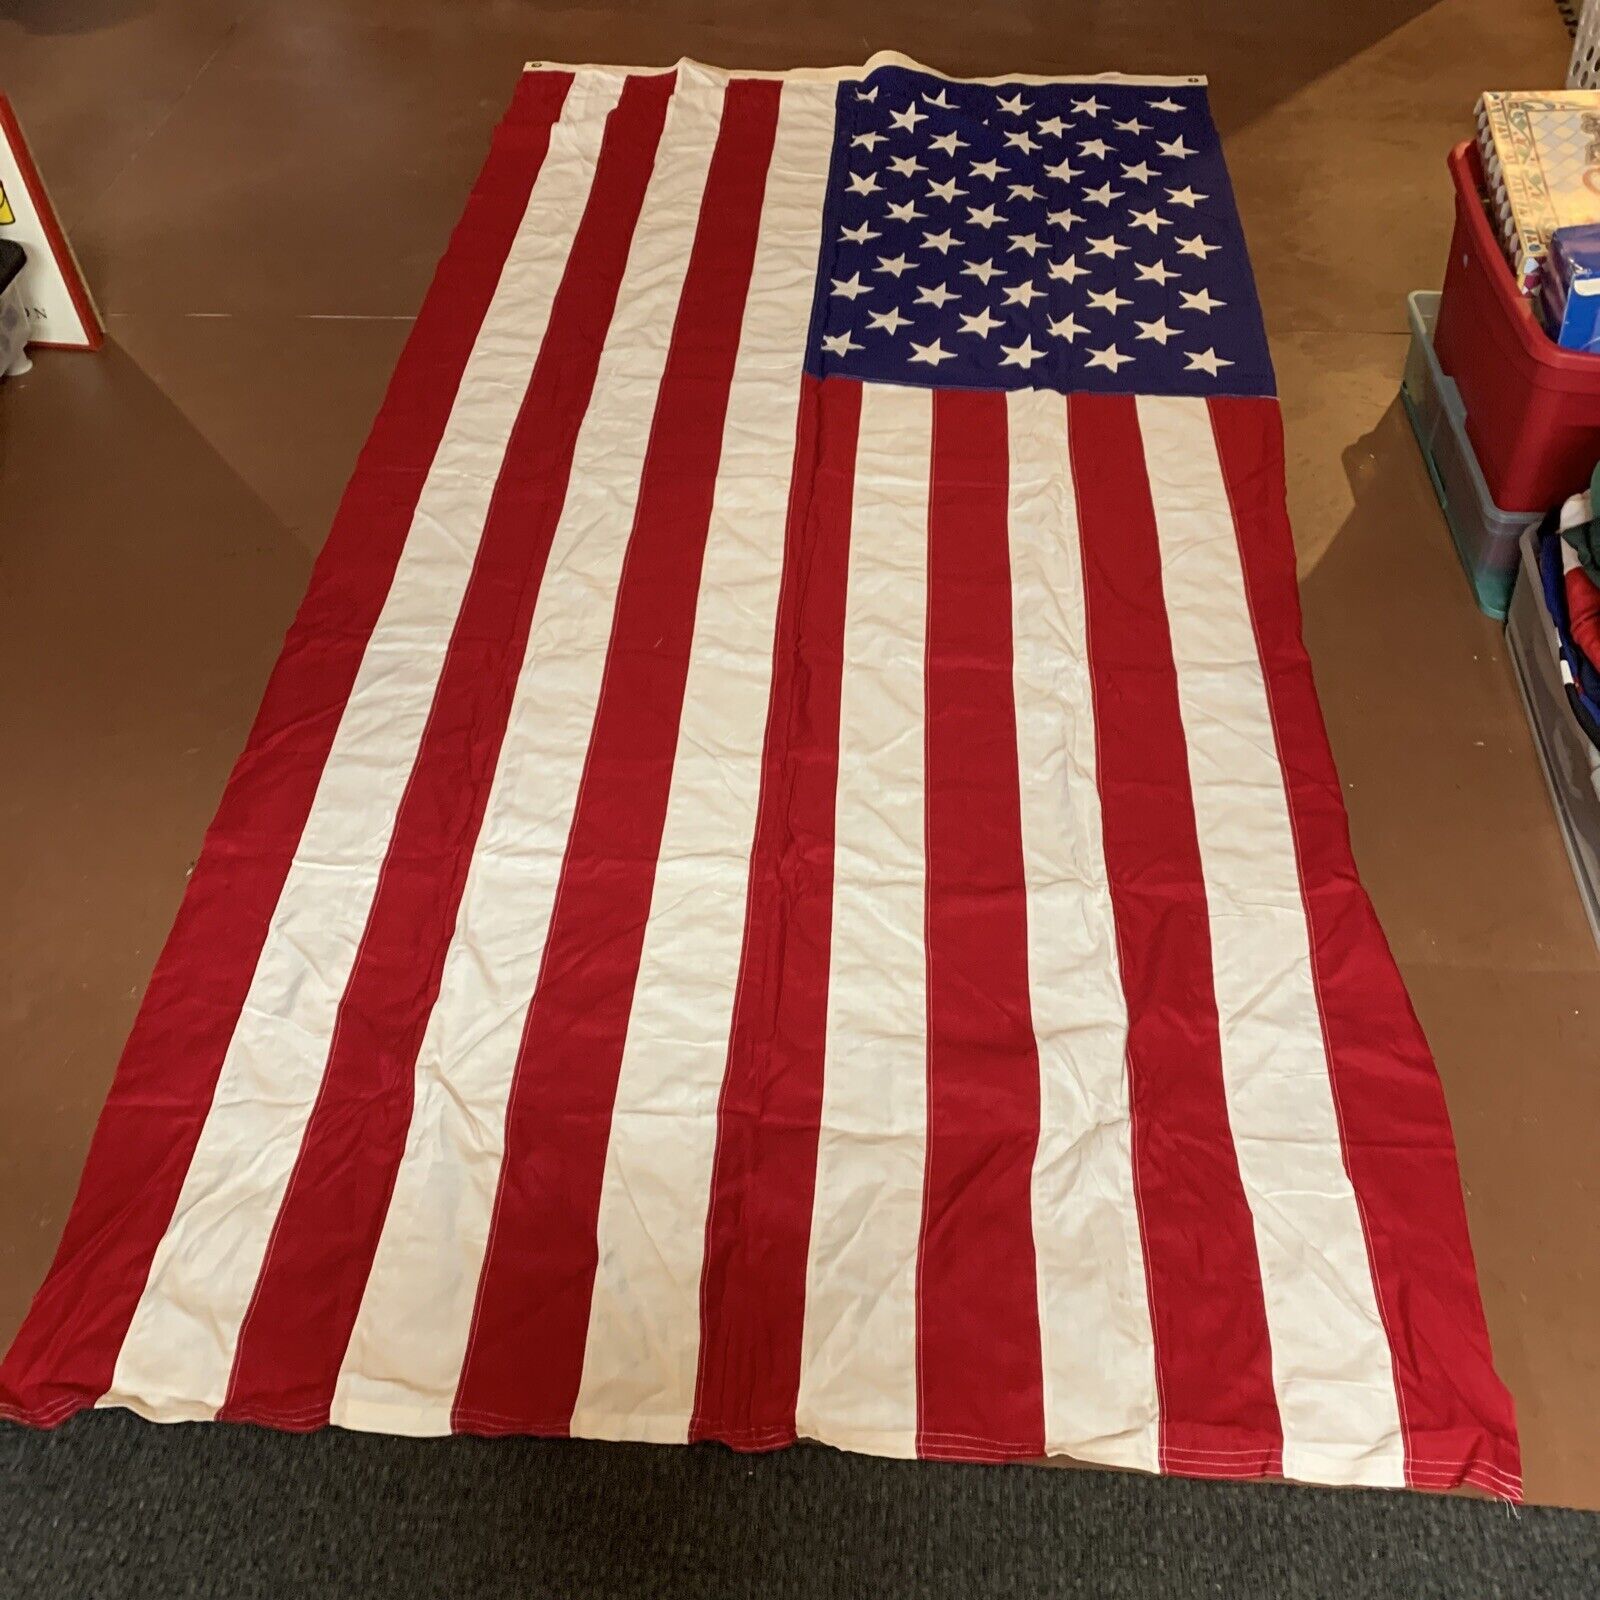 Huge American Flag 9.5’ X 4.5’ Cotton Bunting Made in USA by Valley Forge Flag